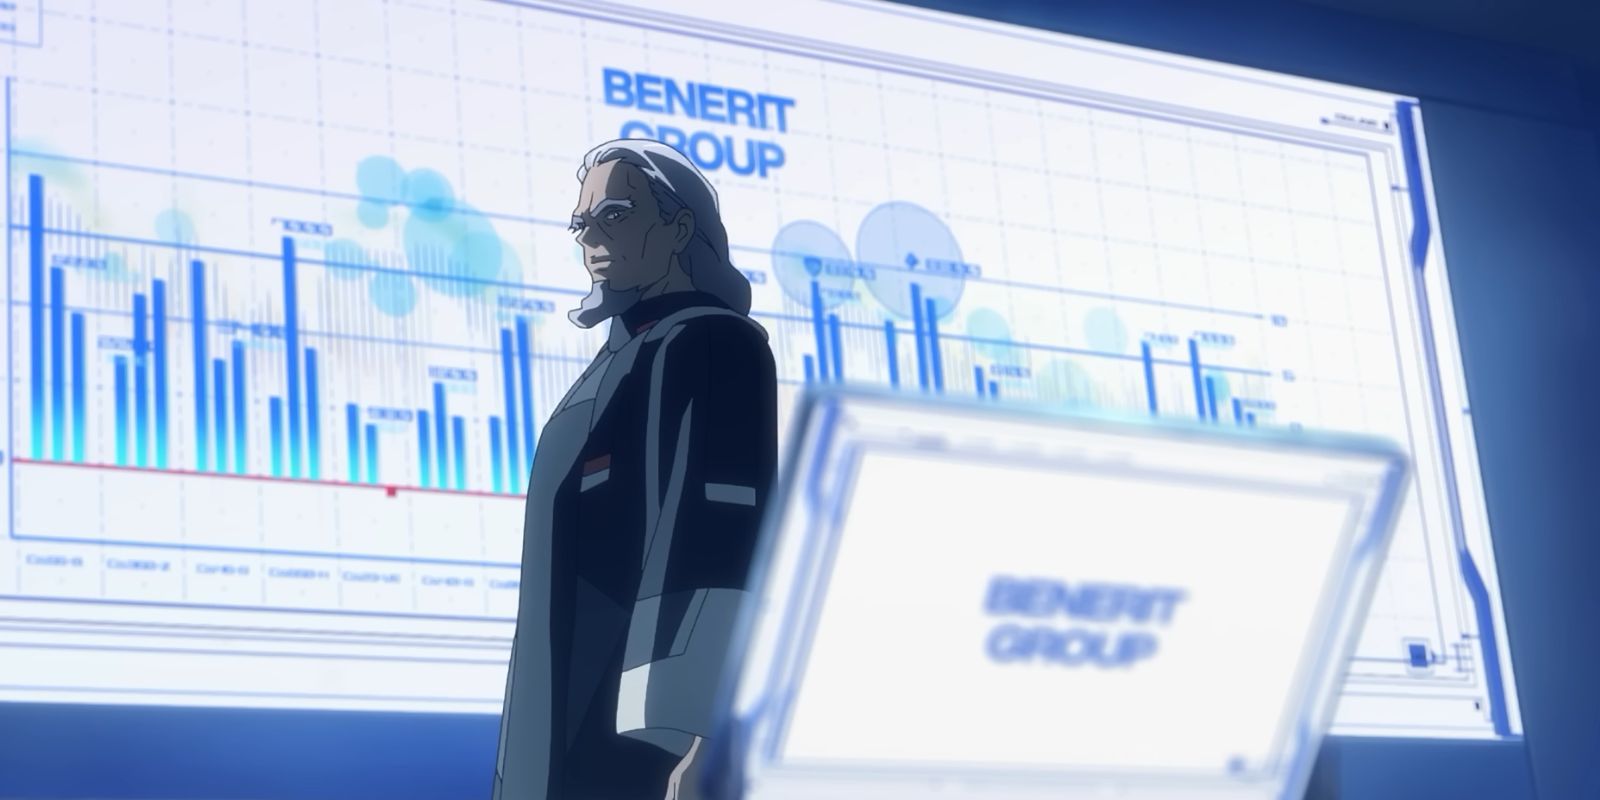 Gundam Witch From Mercury Episode 1 Delling Rembran the President of the Benerit Group